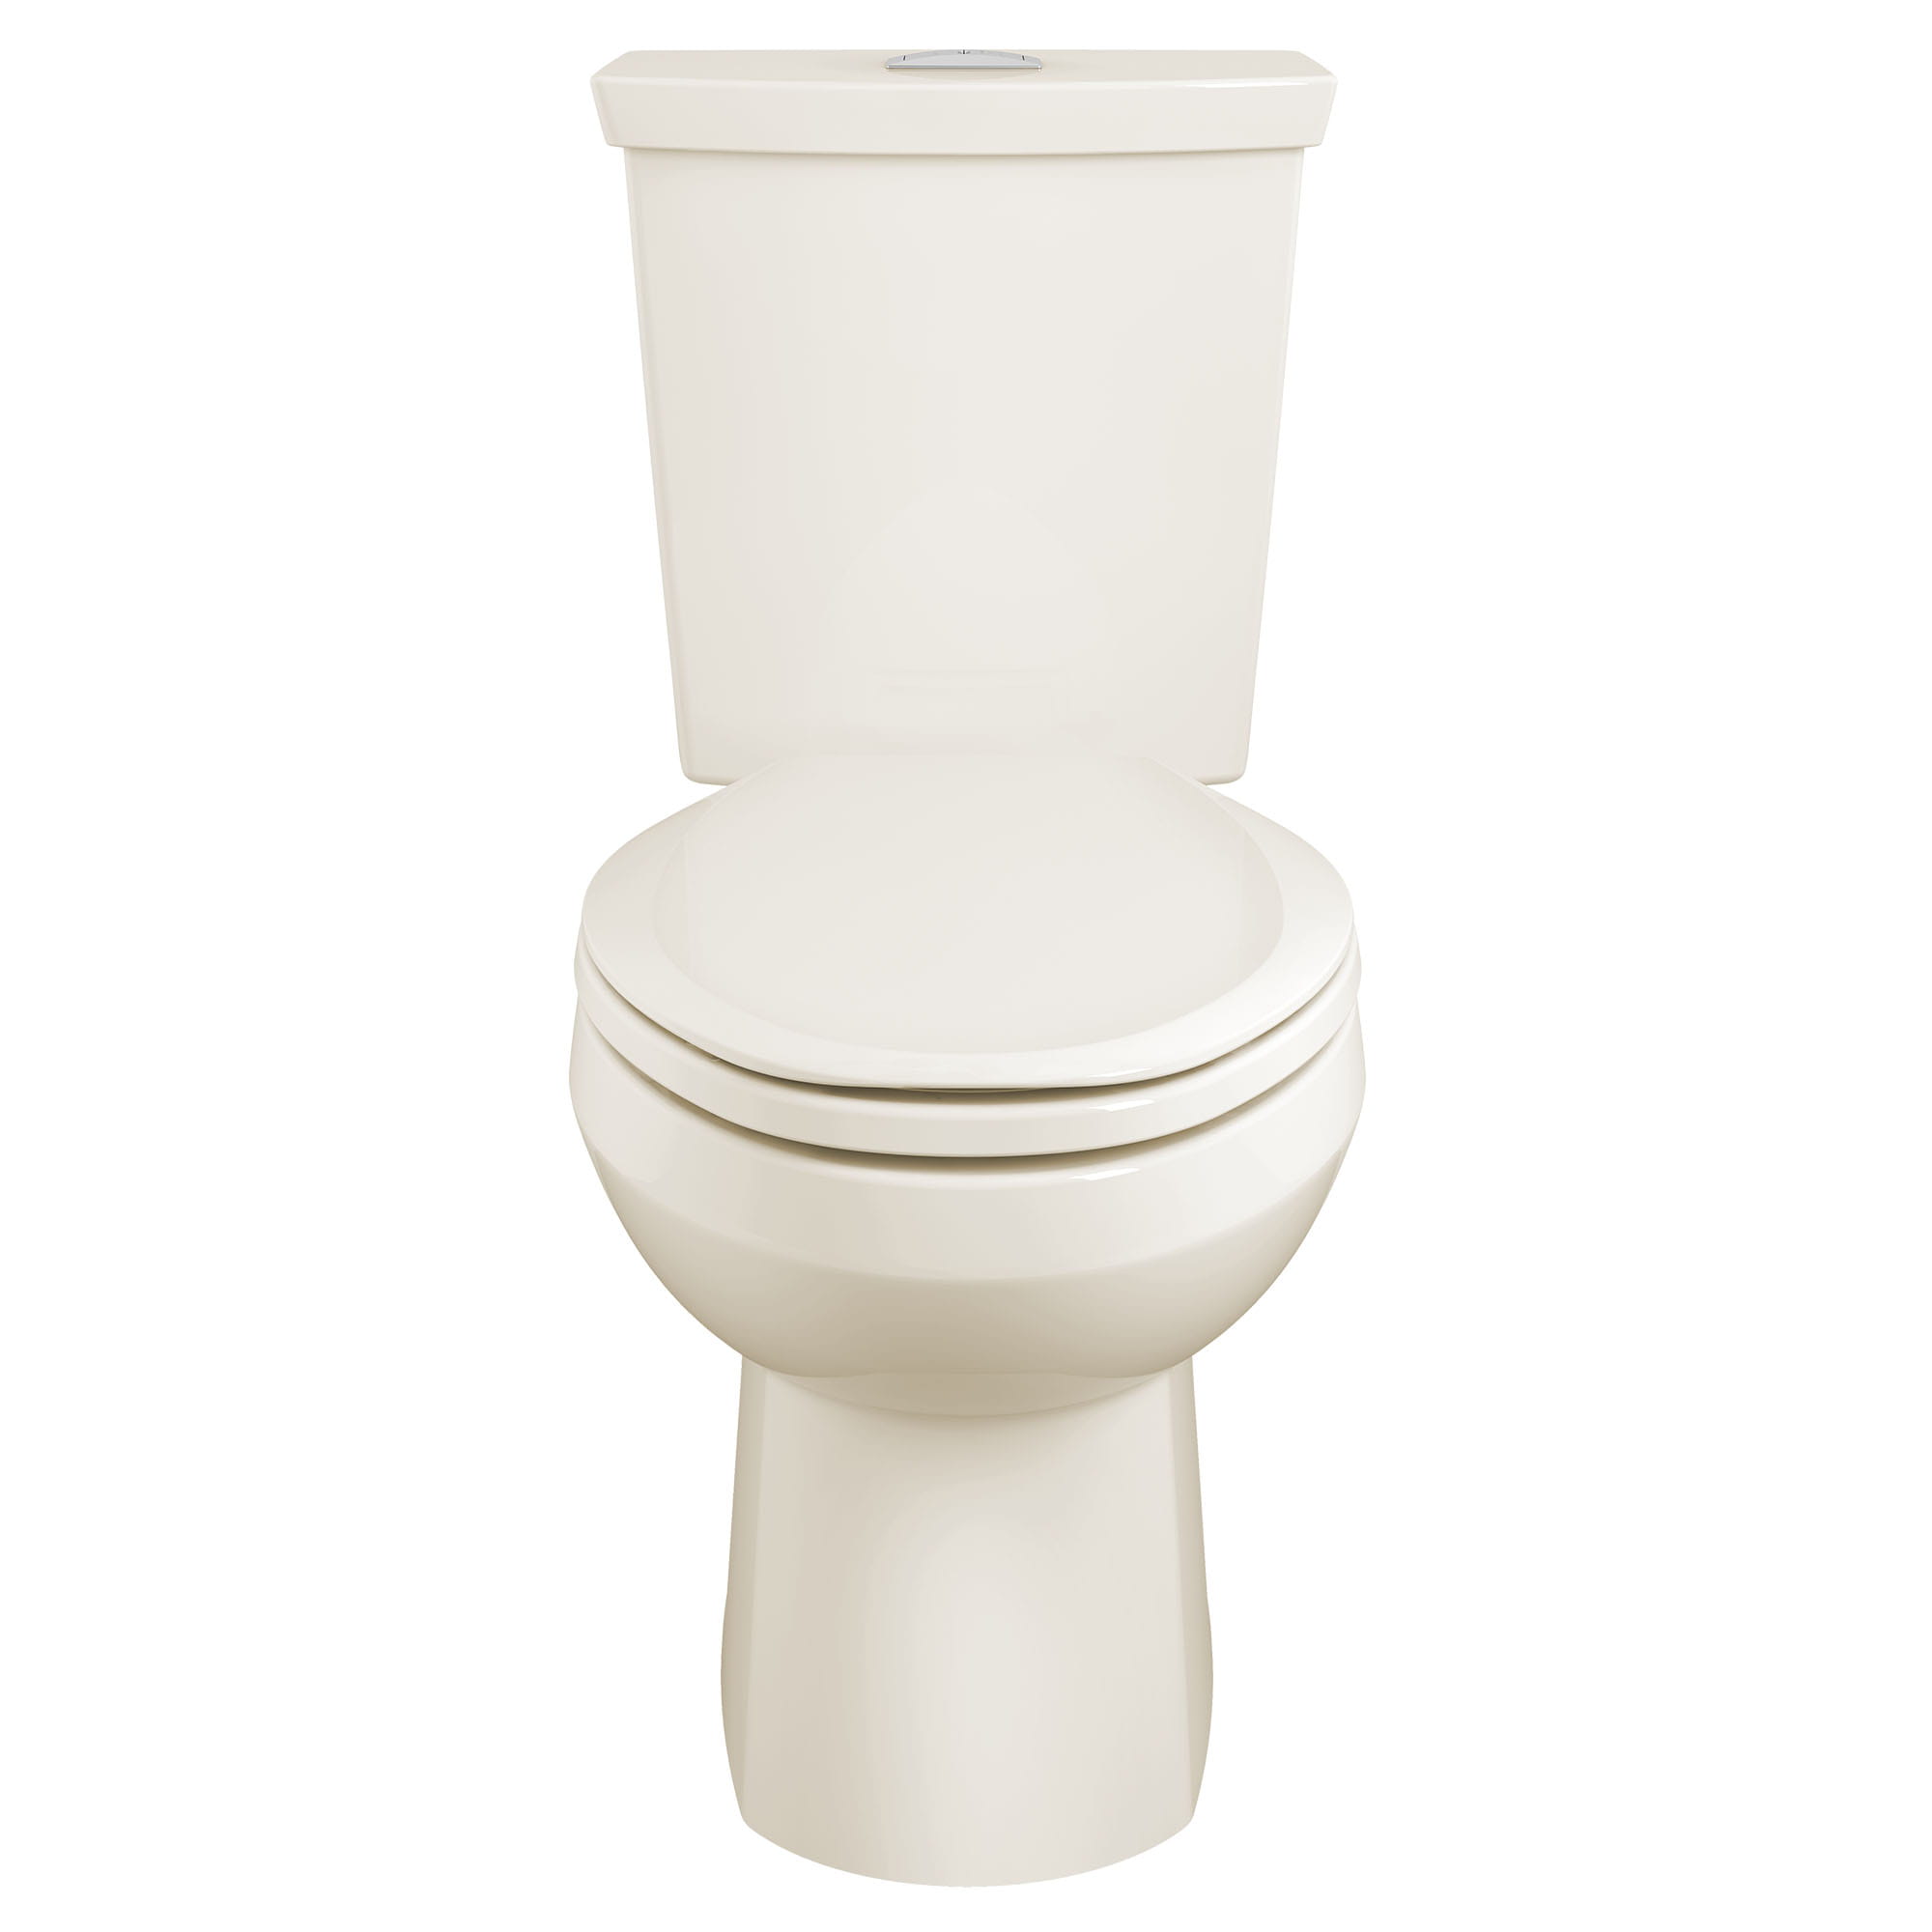 H2Option® Two-Piece Dual Flush 1.28 gpf/4.8 Lpf and 0.92 gpf/3.5 Lpf Standard Height Elongated Toilet With Liner Less Seat